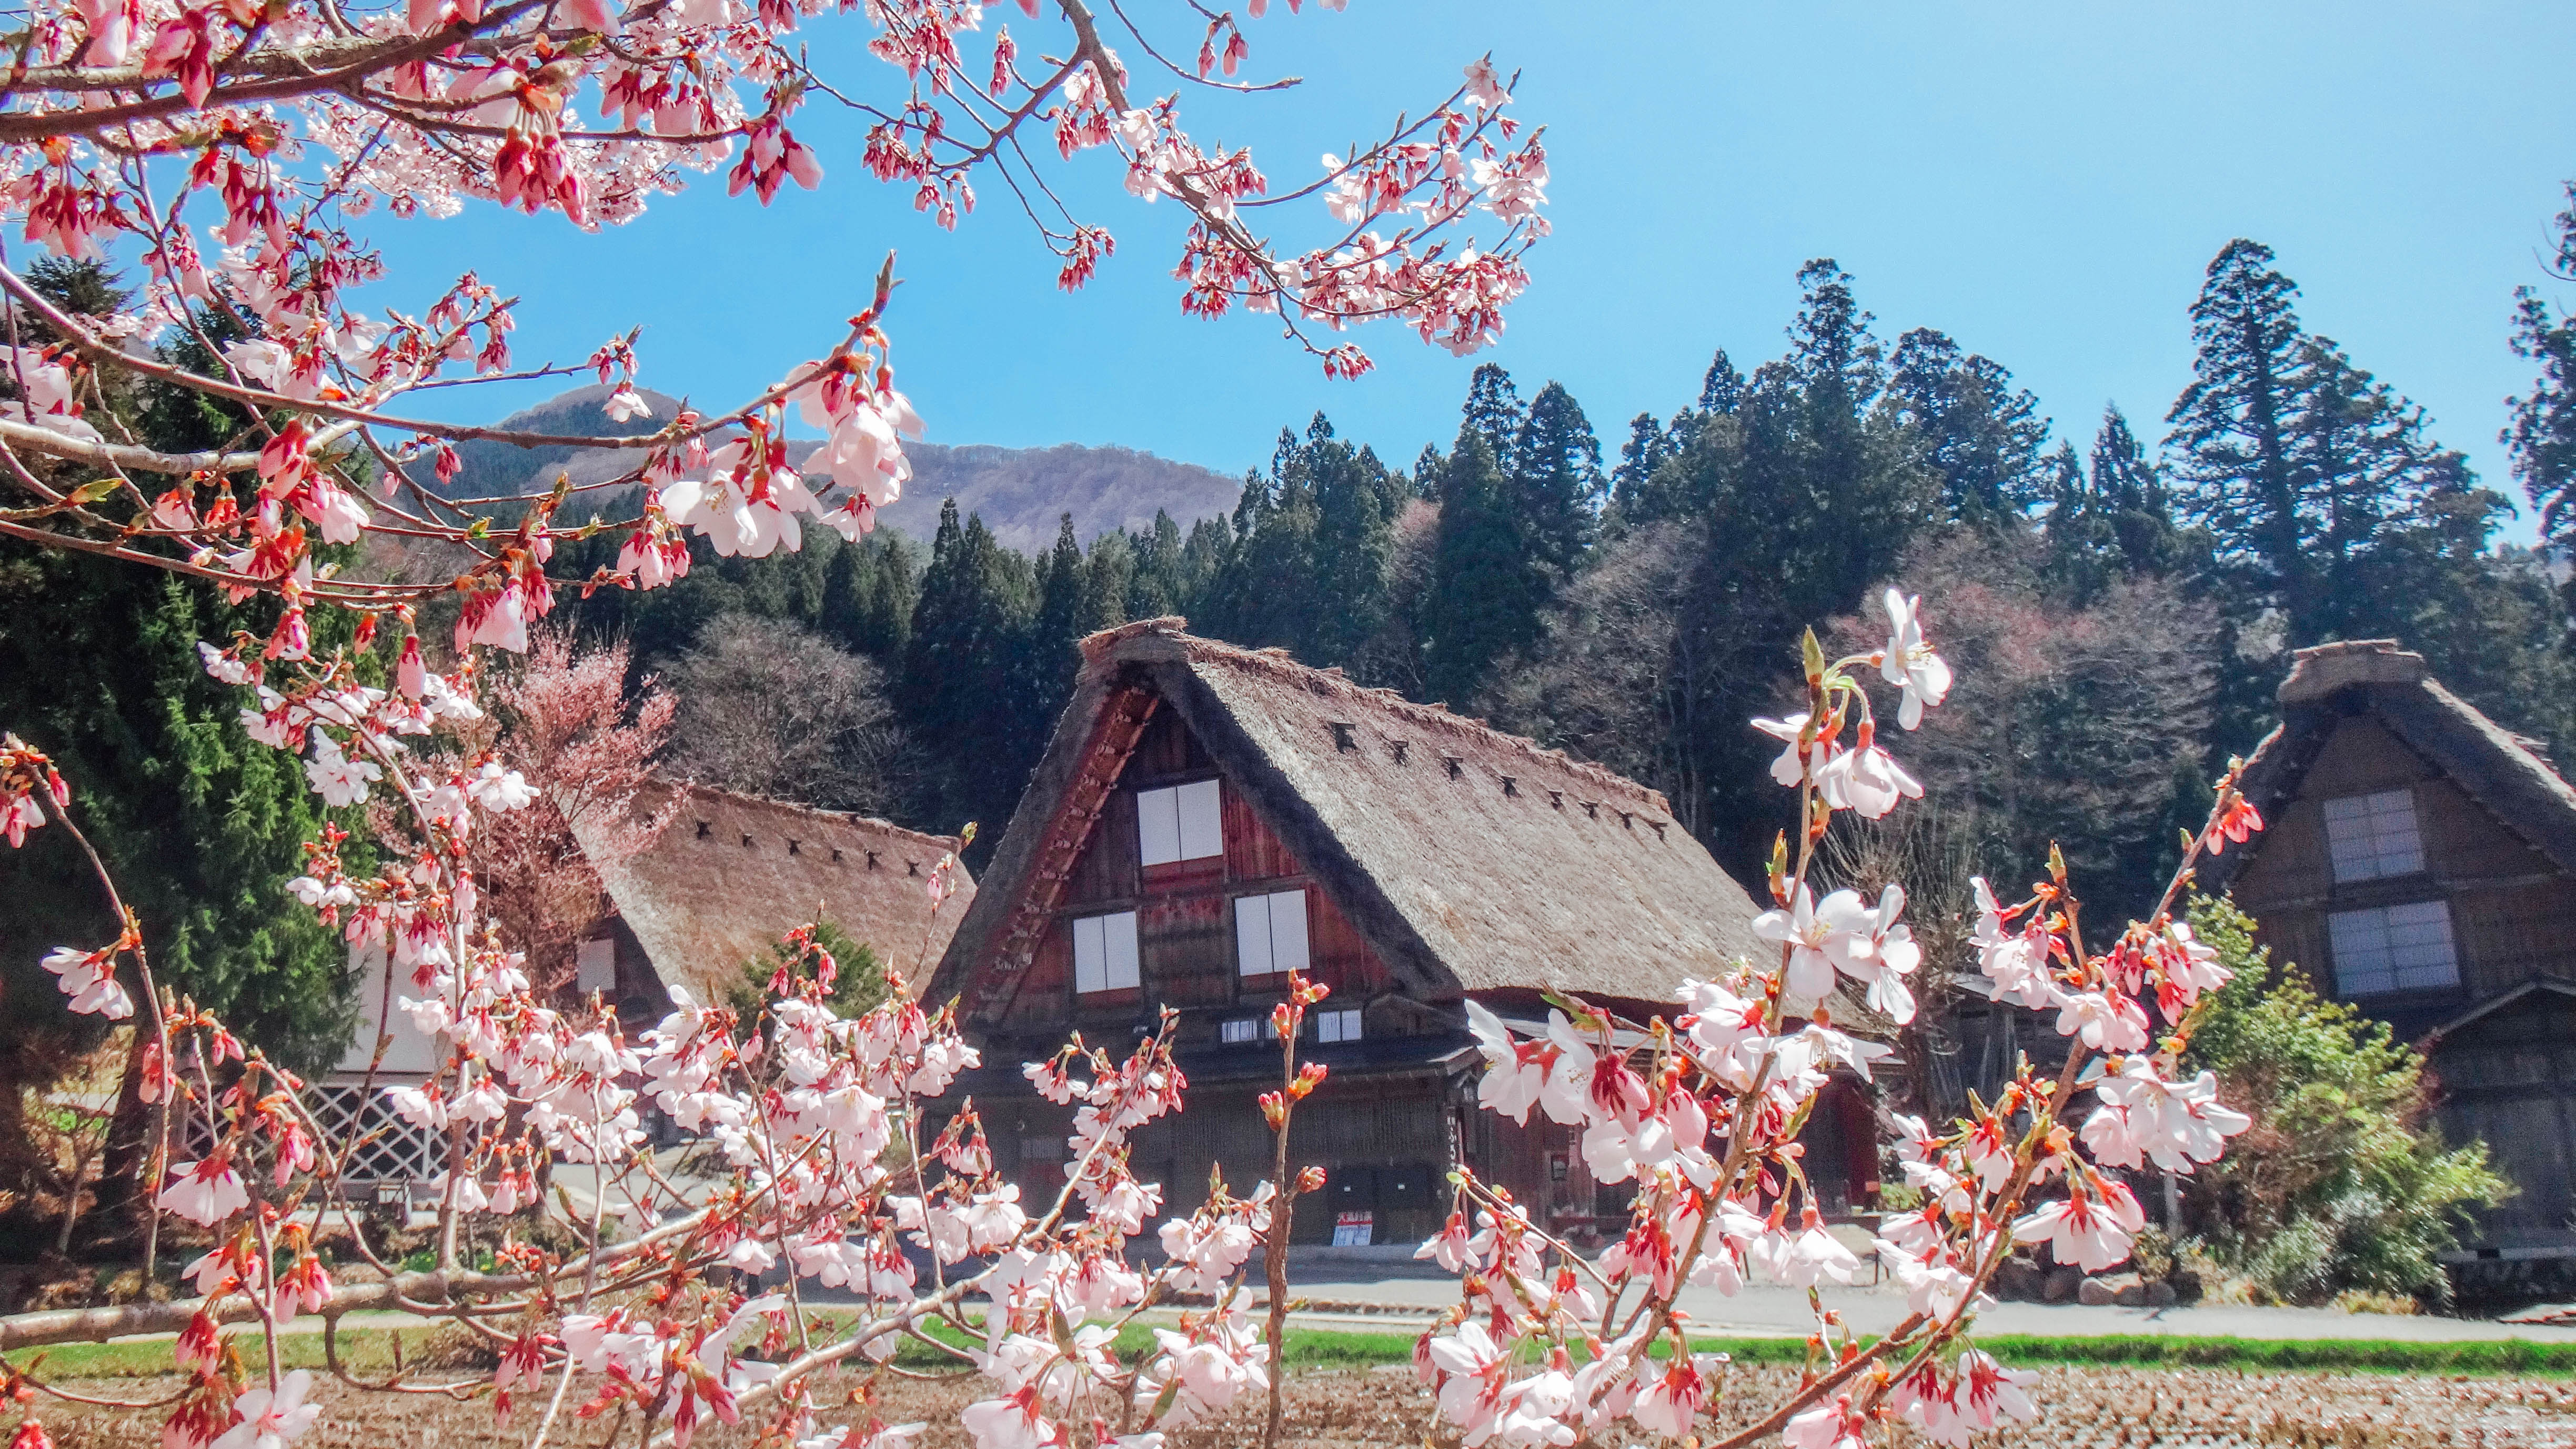 Planning your cherry blossom Japan adventure: 5 beautiful viewing spots